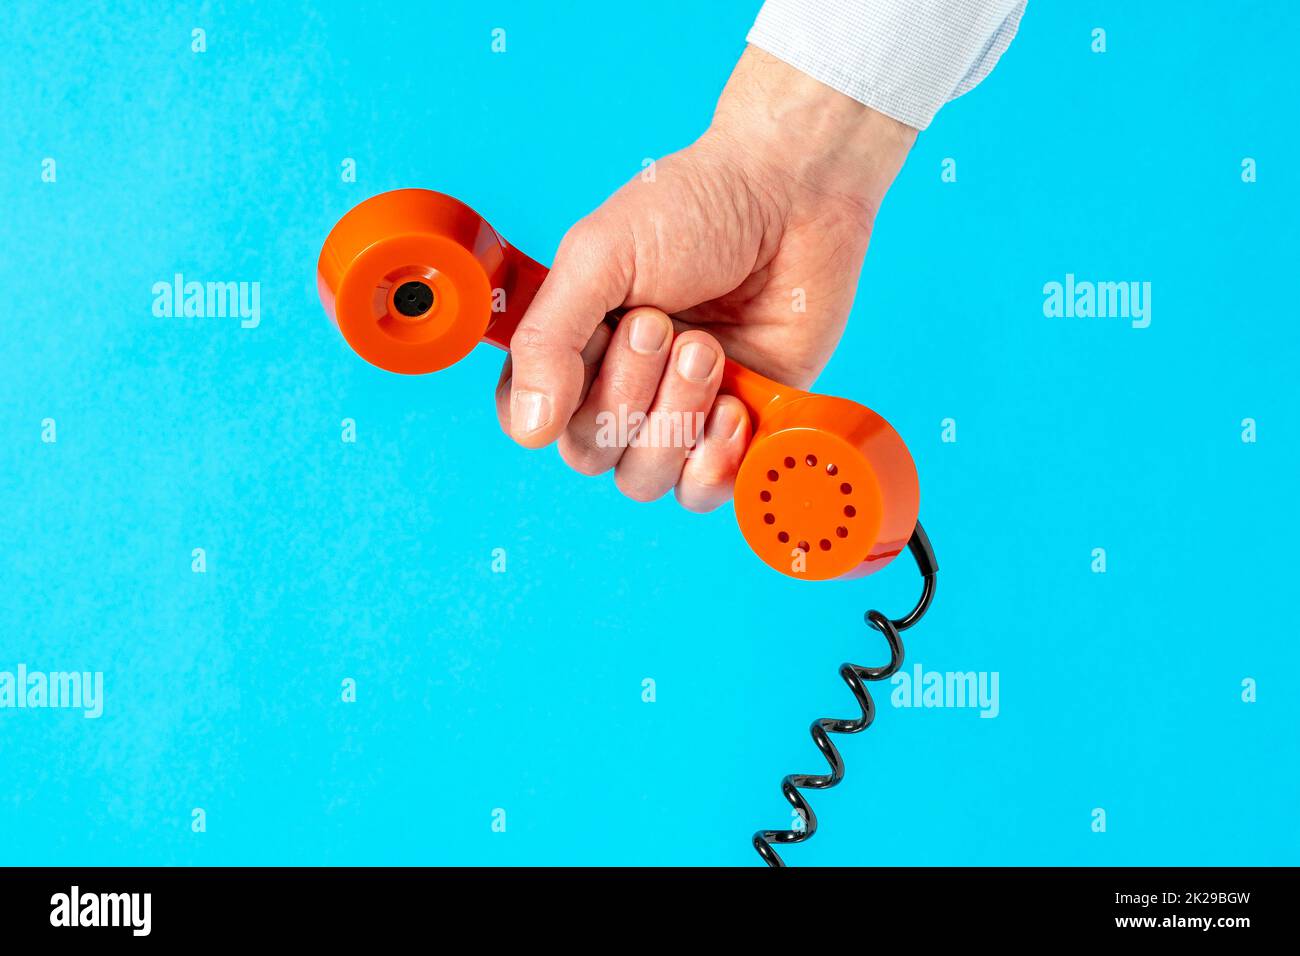 Hand holding old telephone receiver over blue background Stock Photo ...